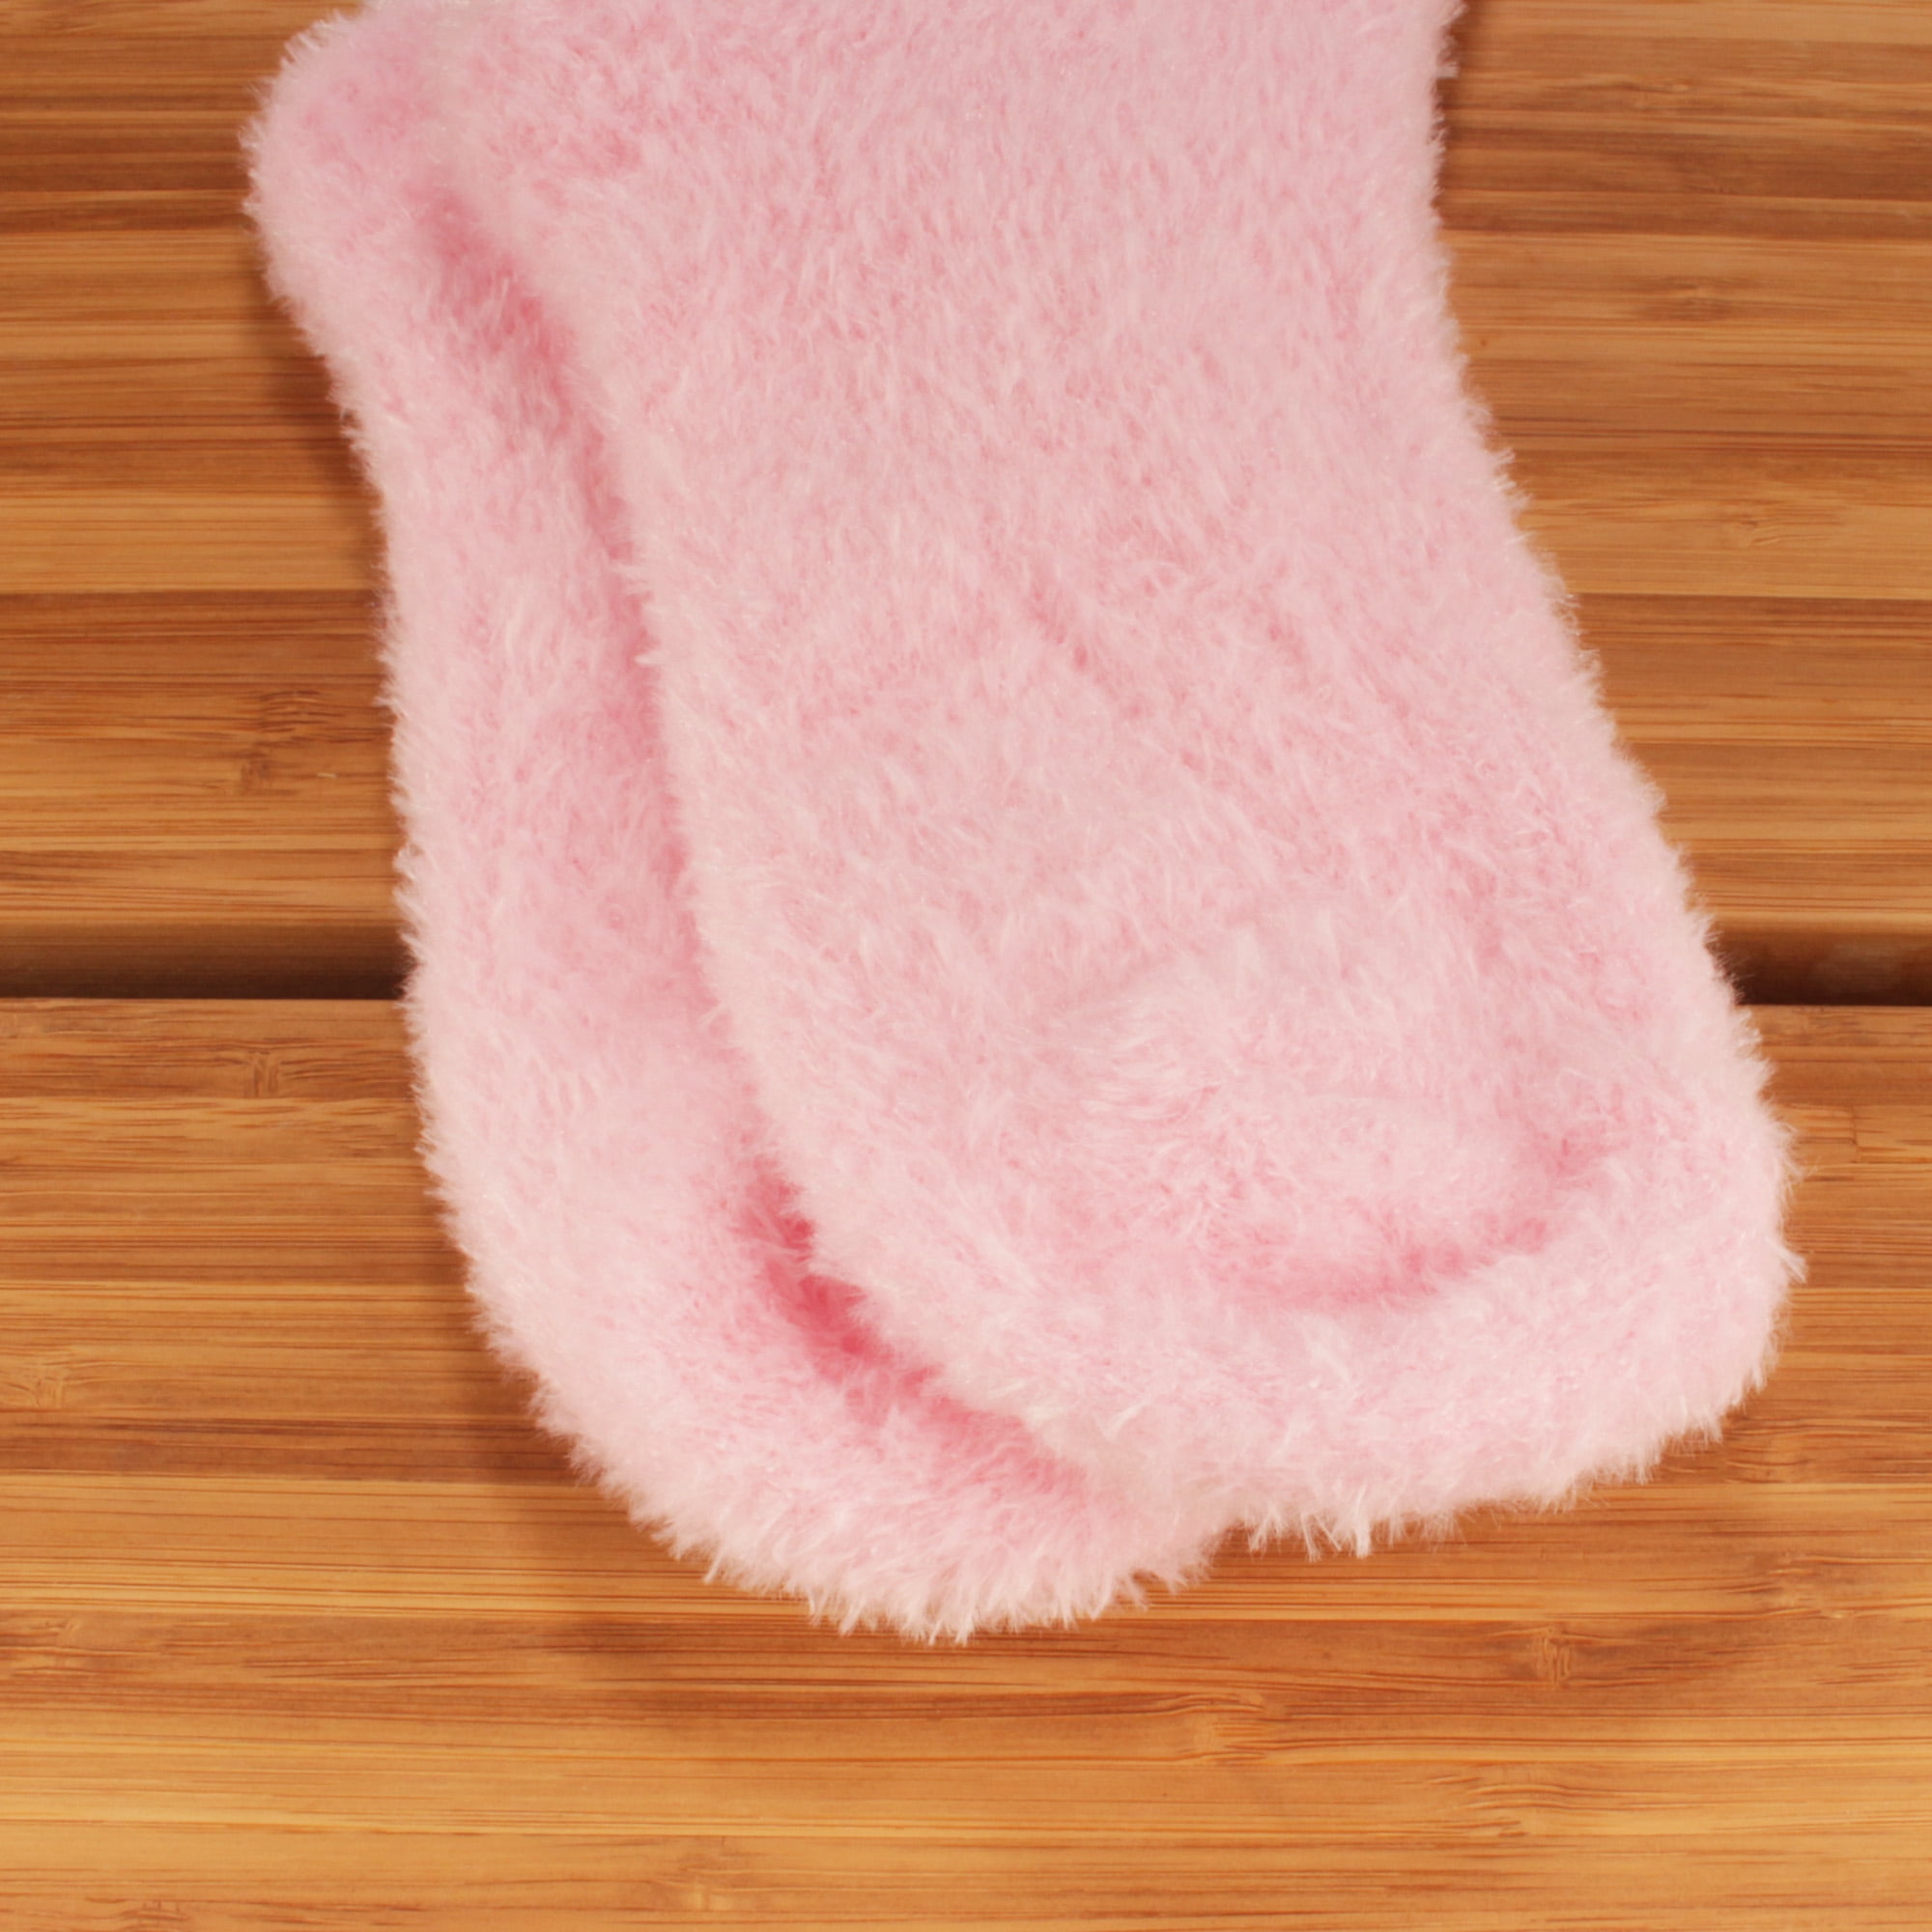 Women's Extra Large Fuzzy Soft Colored Cozy Plush Warm Fluffy Socks - White  - 4 Pairs